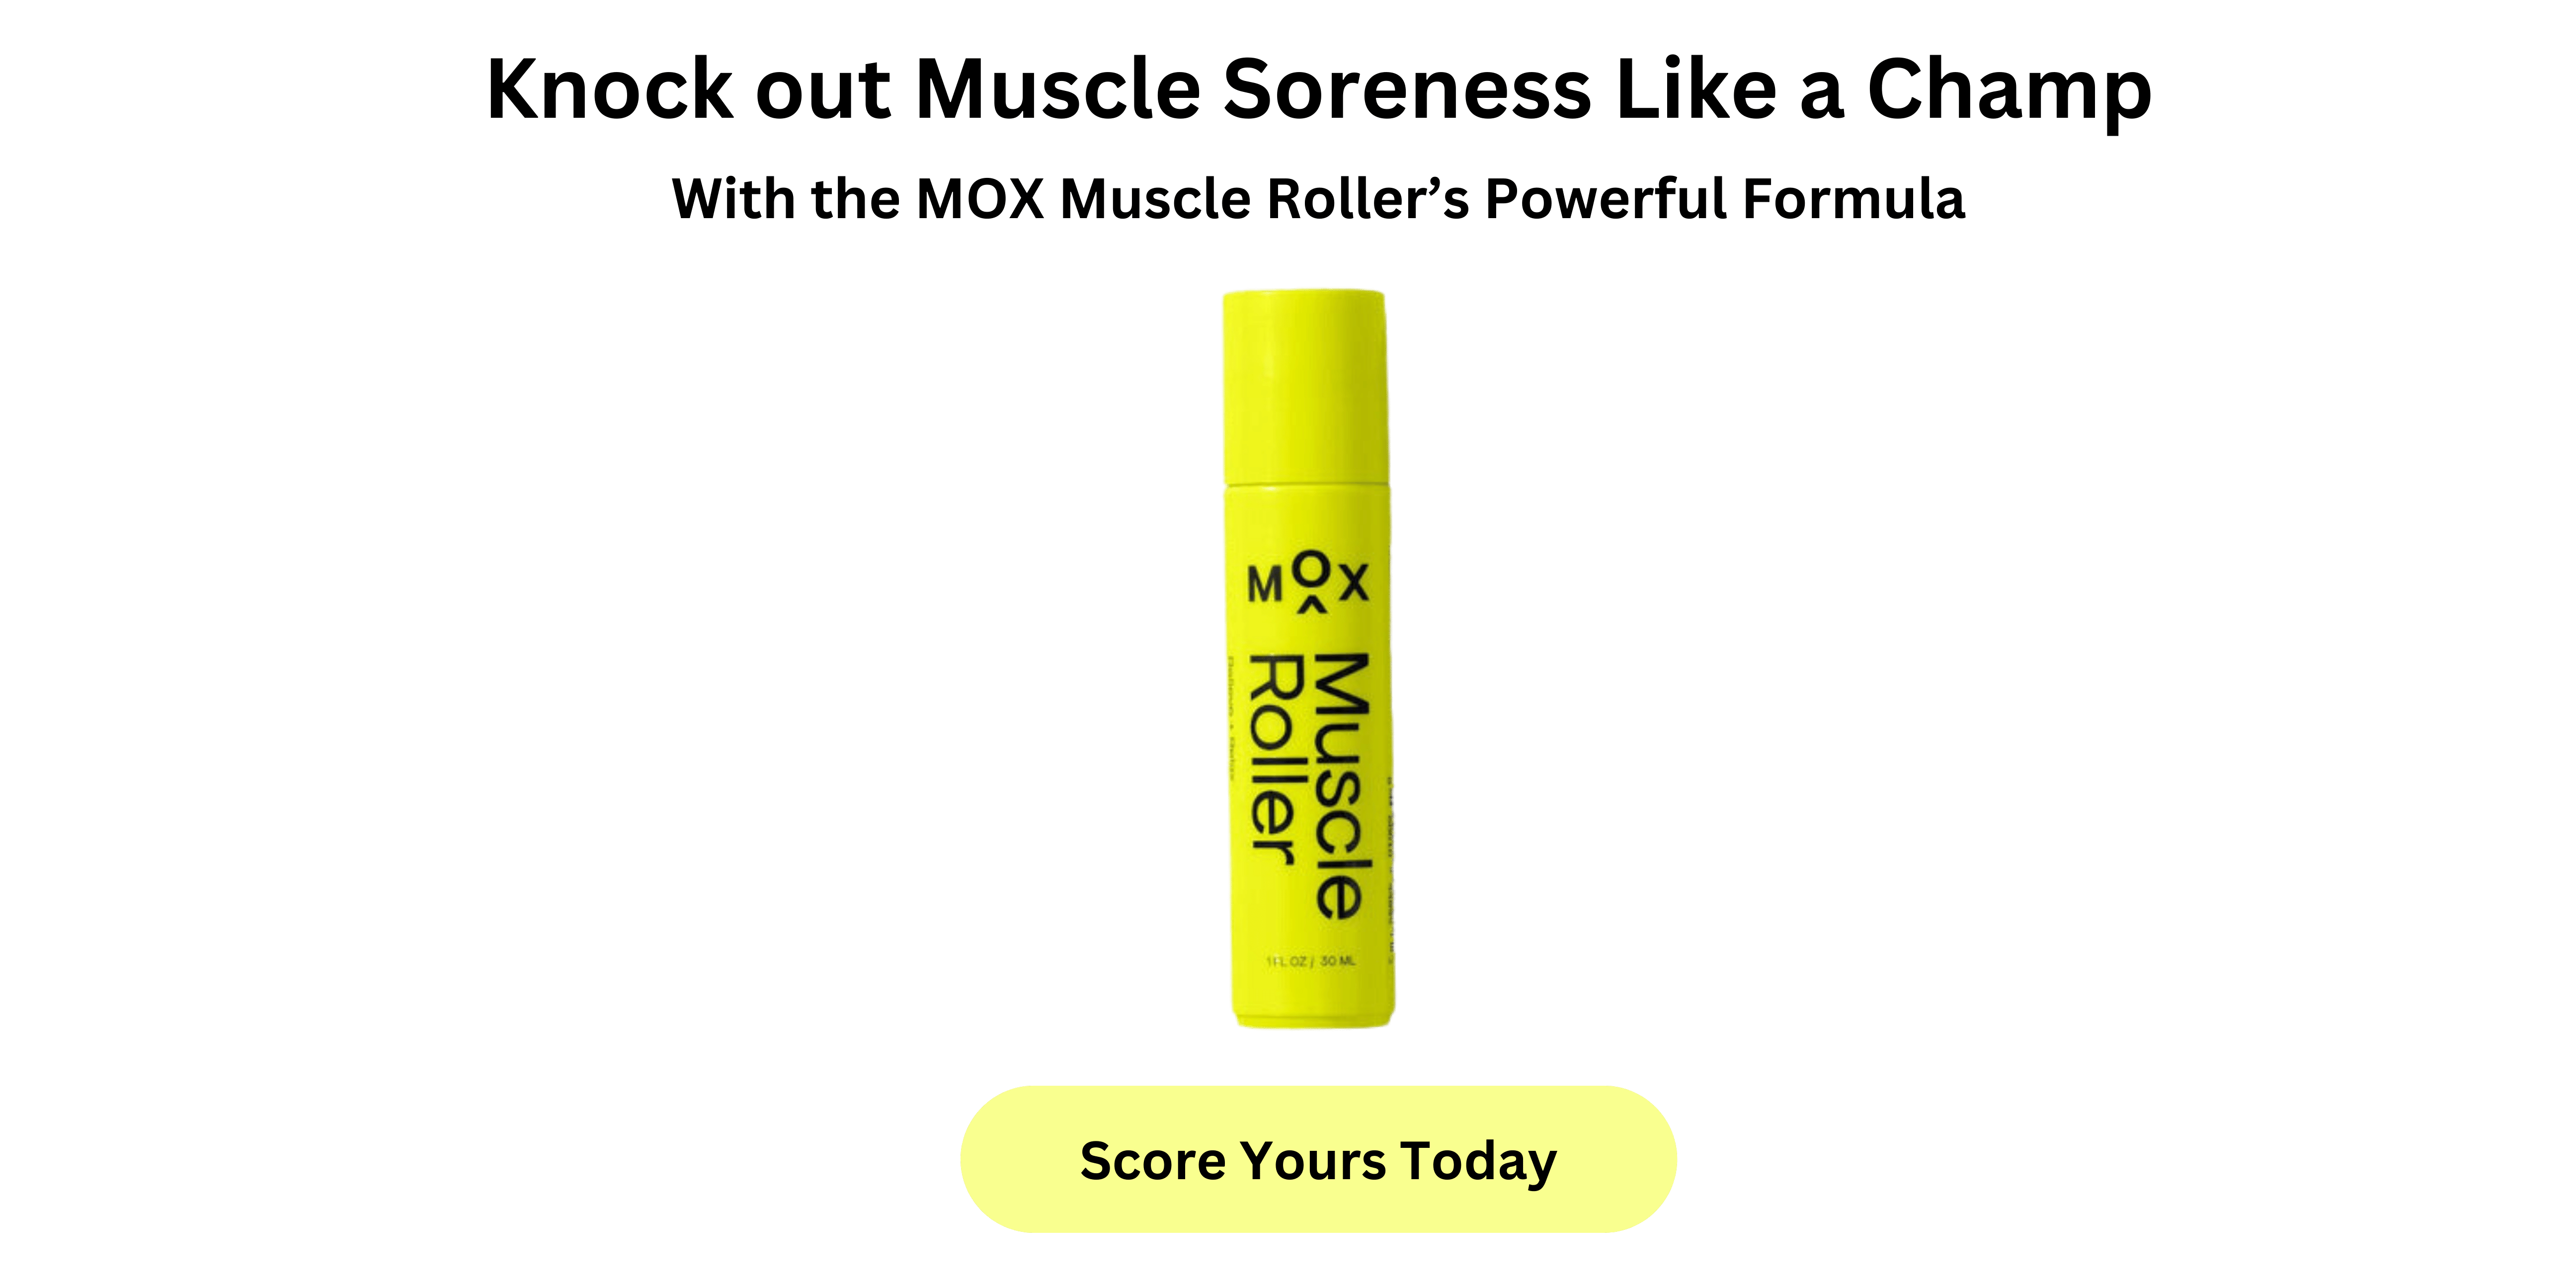 What Muscles Do Treadmills Work? Get rid of muscle soreness and discomfort fast with the MOX Muscle Roller.